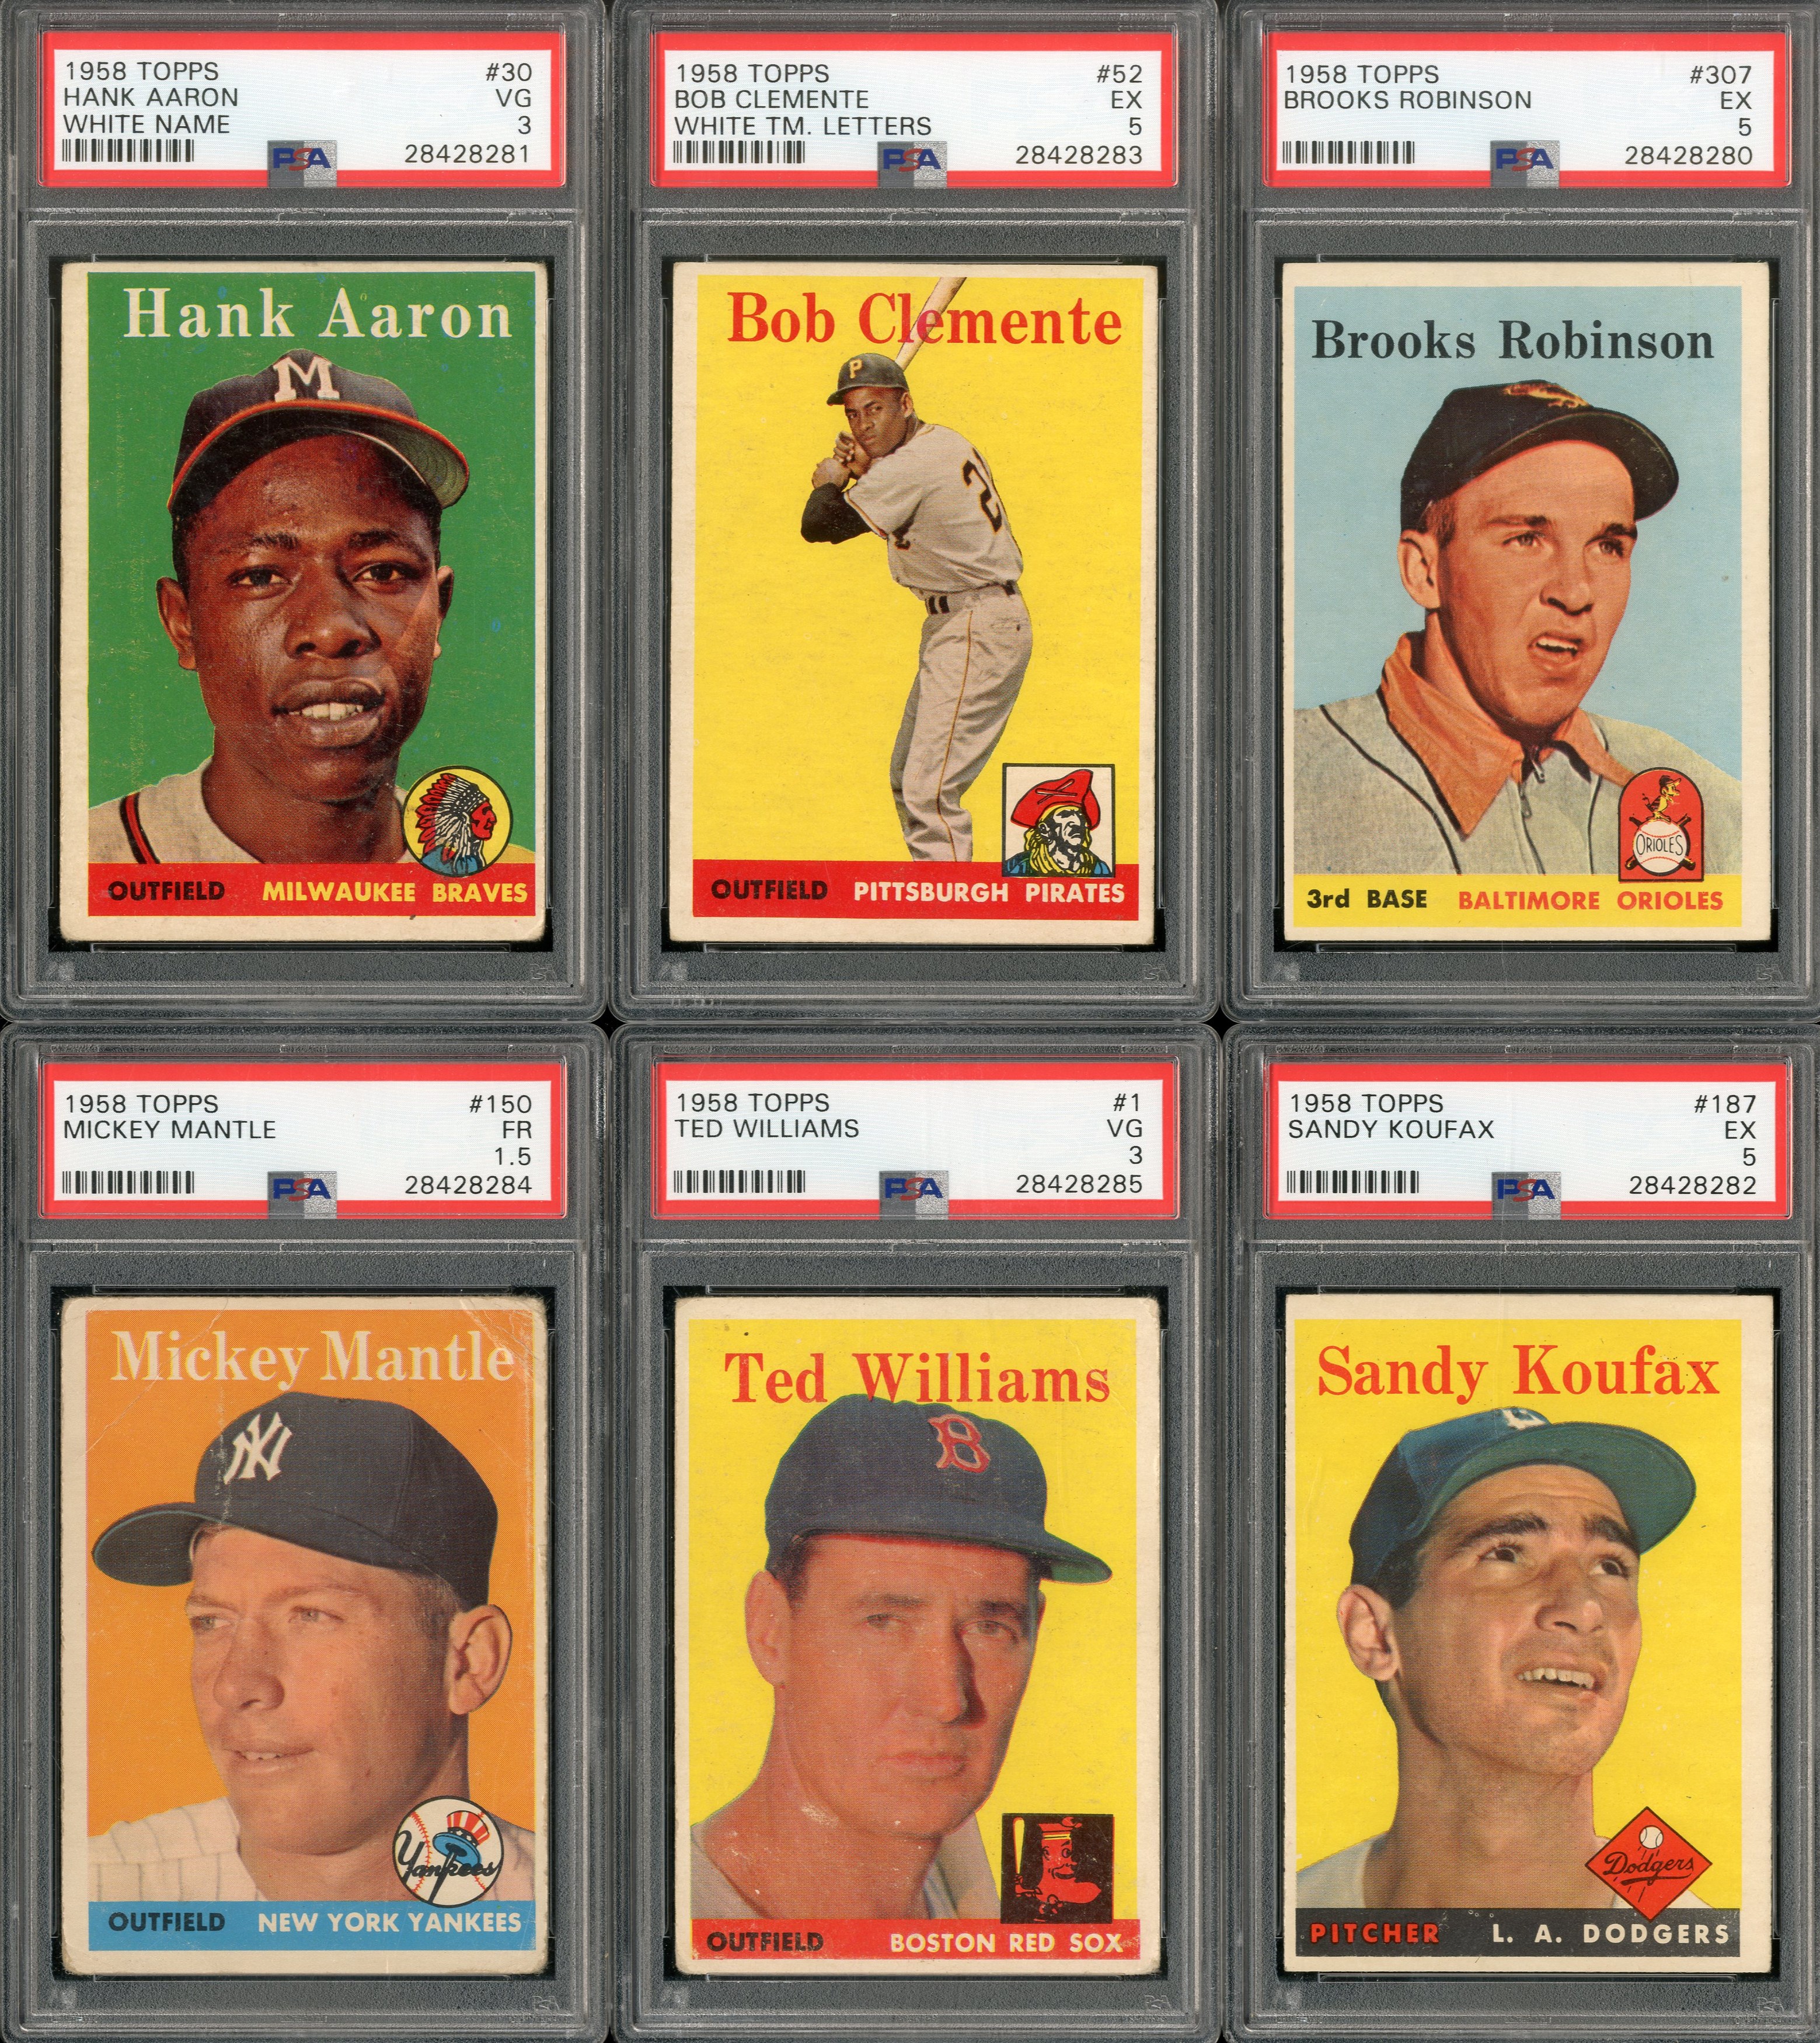 Baseball and Trading Cards - 1958 Topps Complete Set (494 Cards)